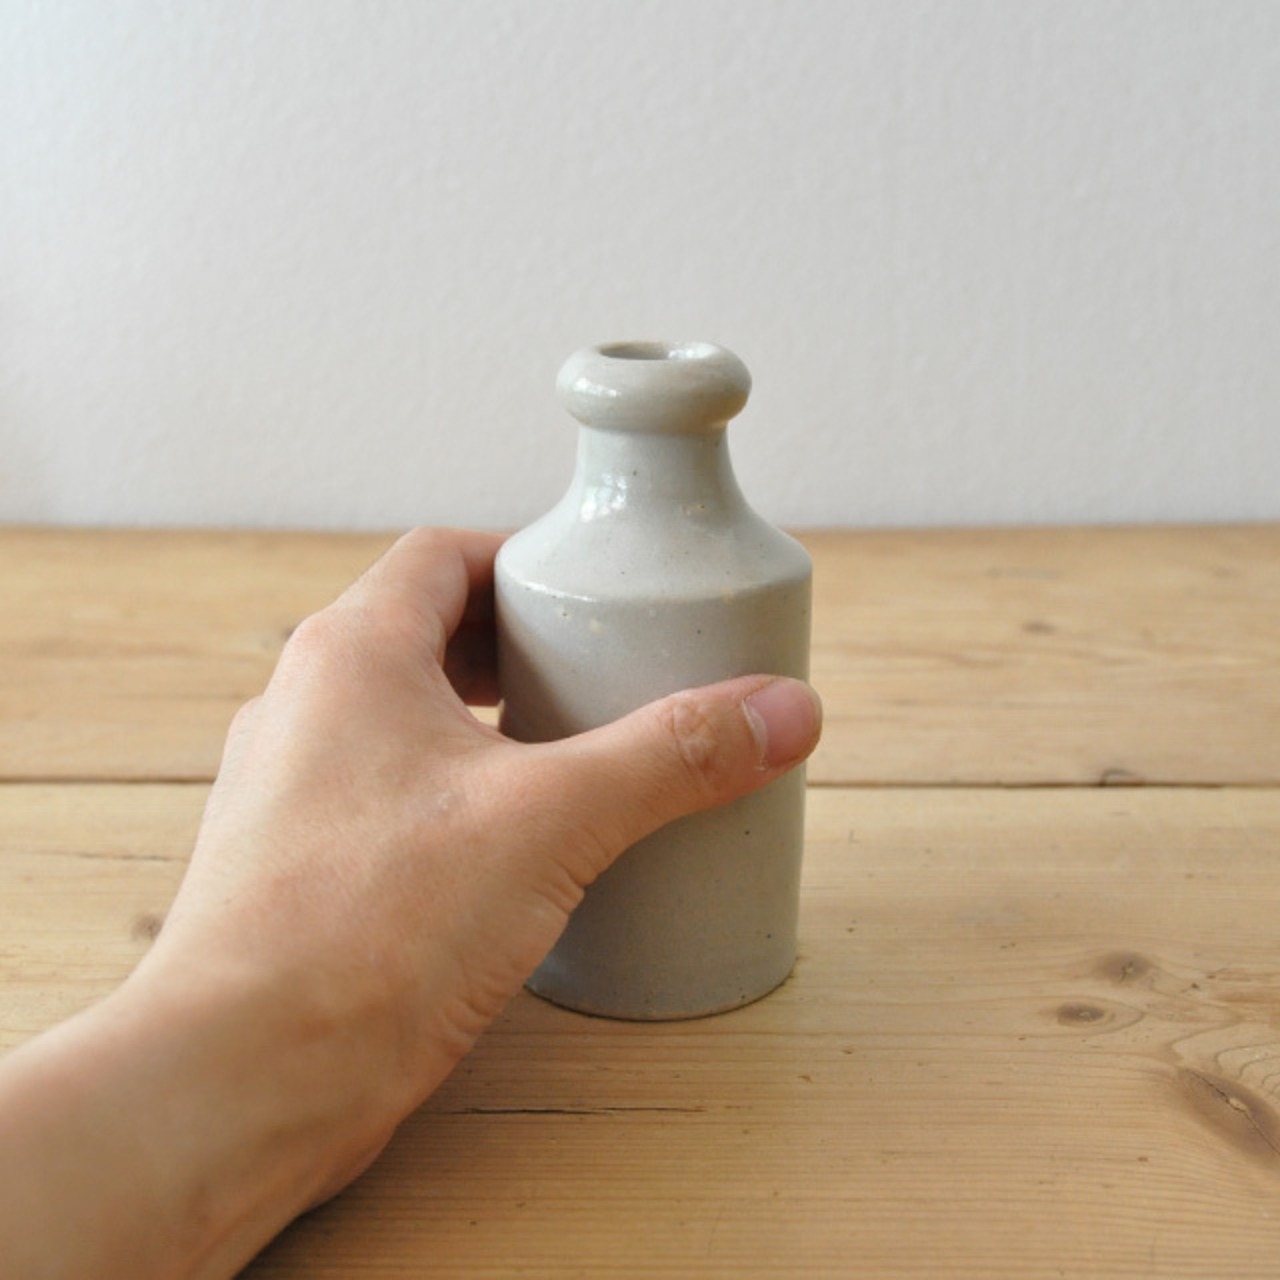 French Pottery Bottle A / フレンチ ポタリー ボトル / 1911-0076A